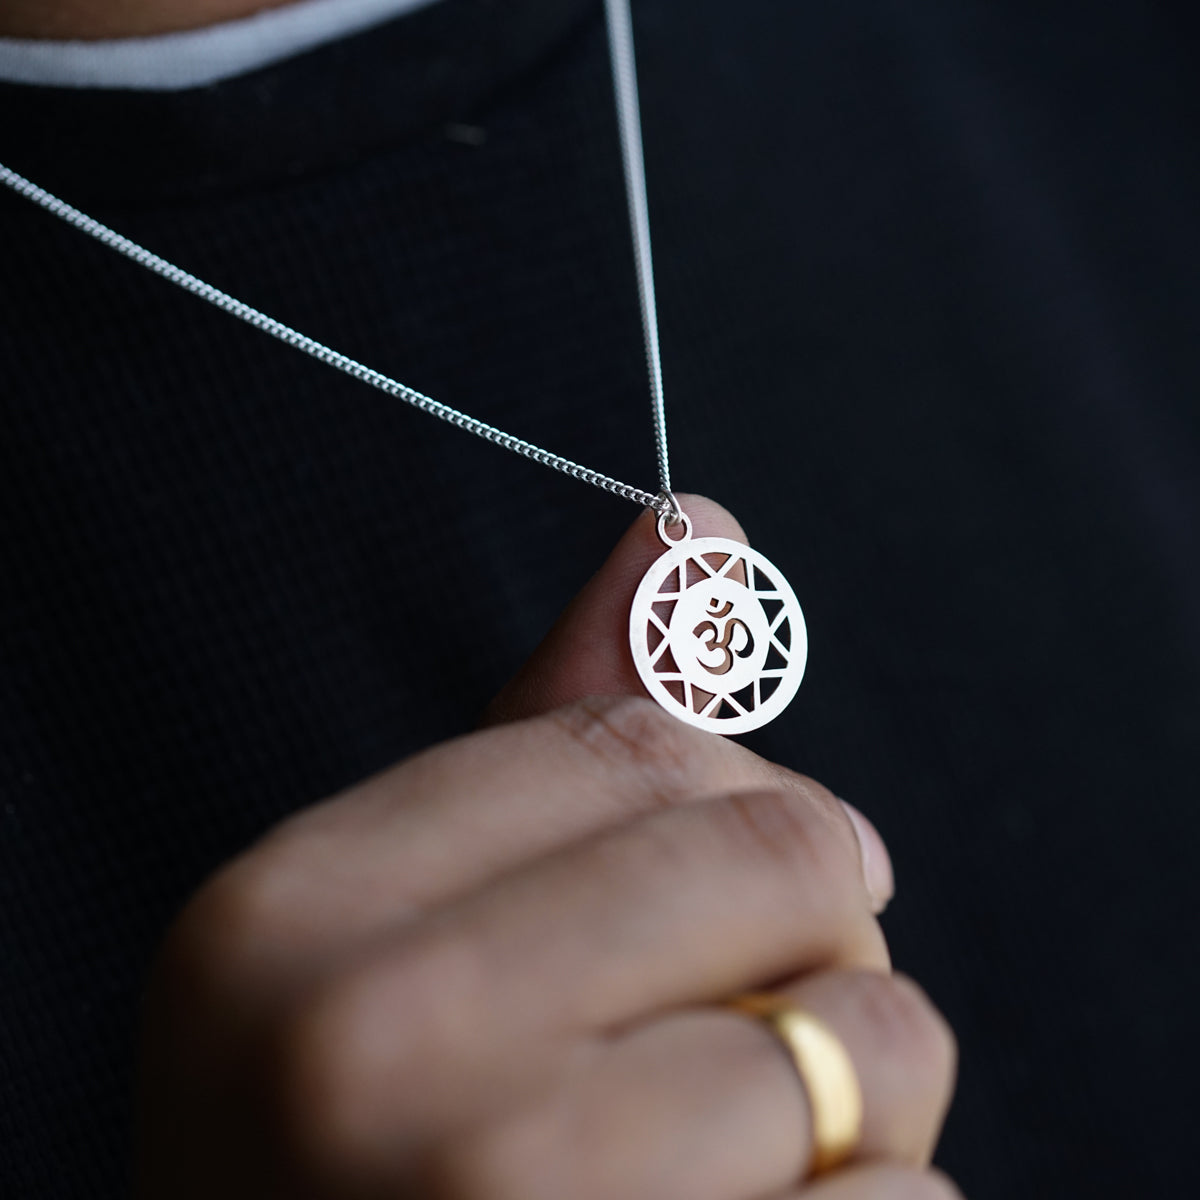 a person wearing a necklace with a symbol on it